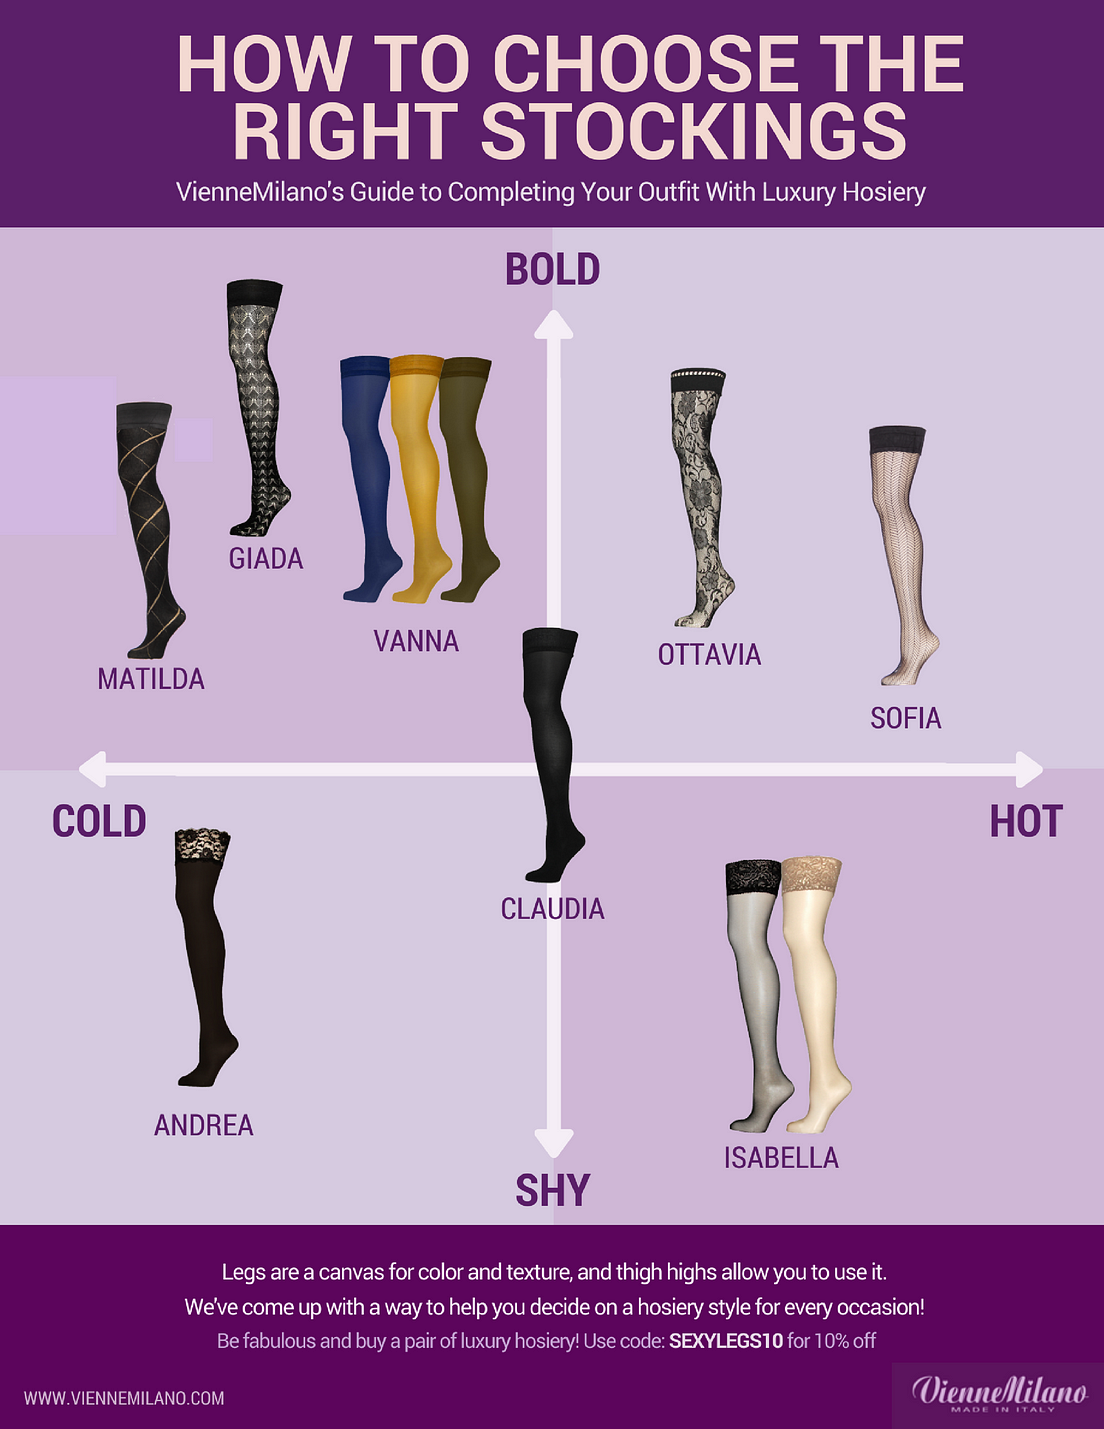 HOW TO CHOOSE STOCKINGS INFOGRAPHIC | by VienneMilano | Medium